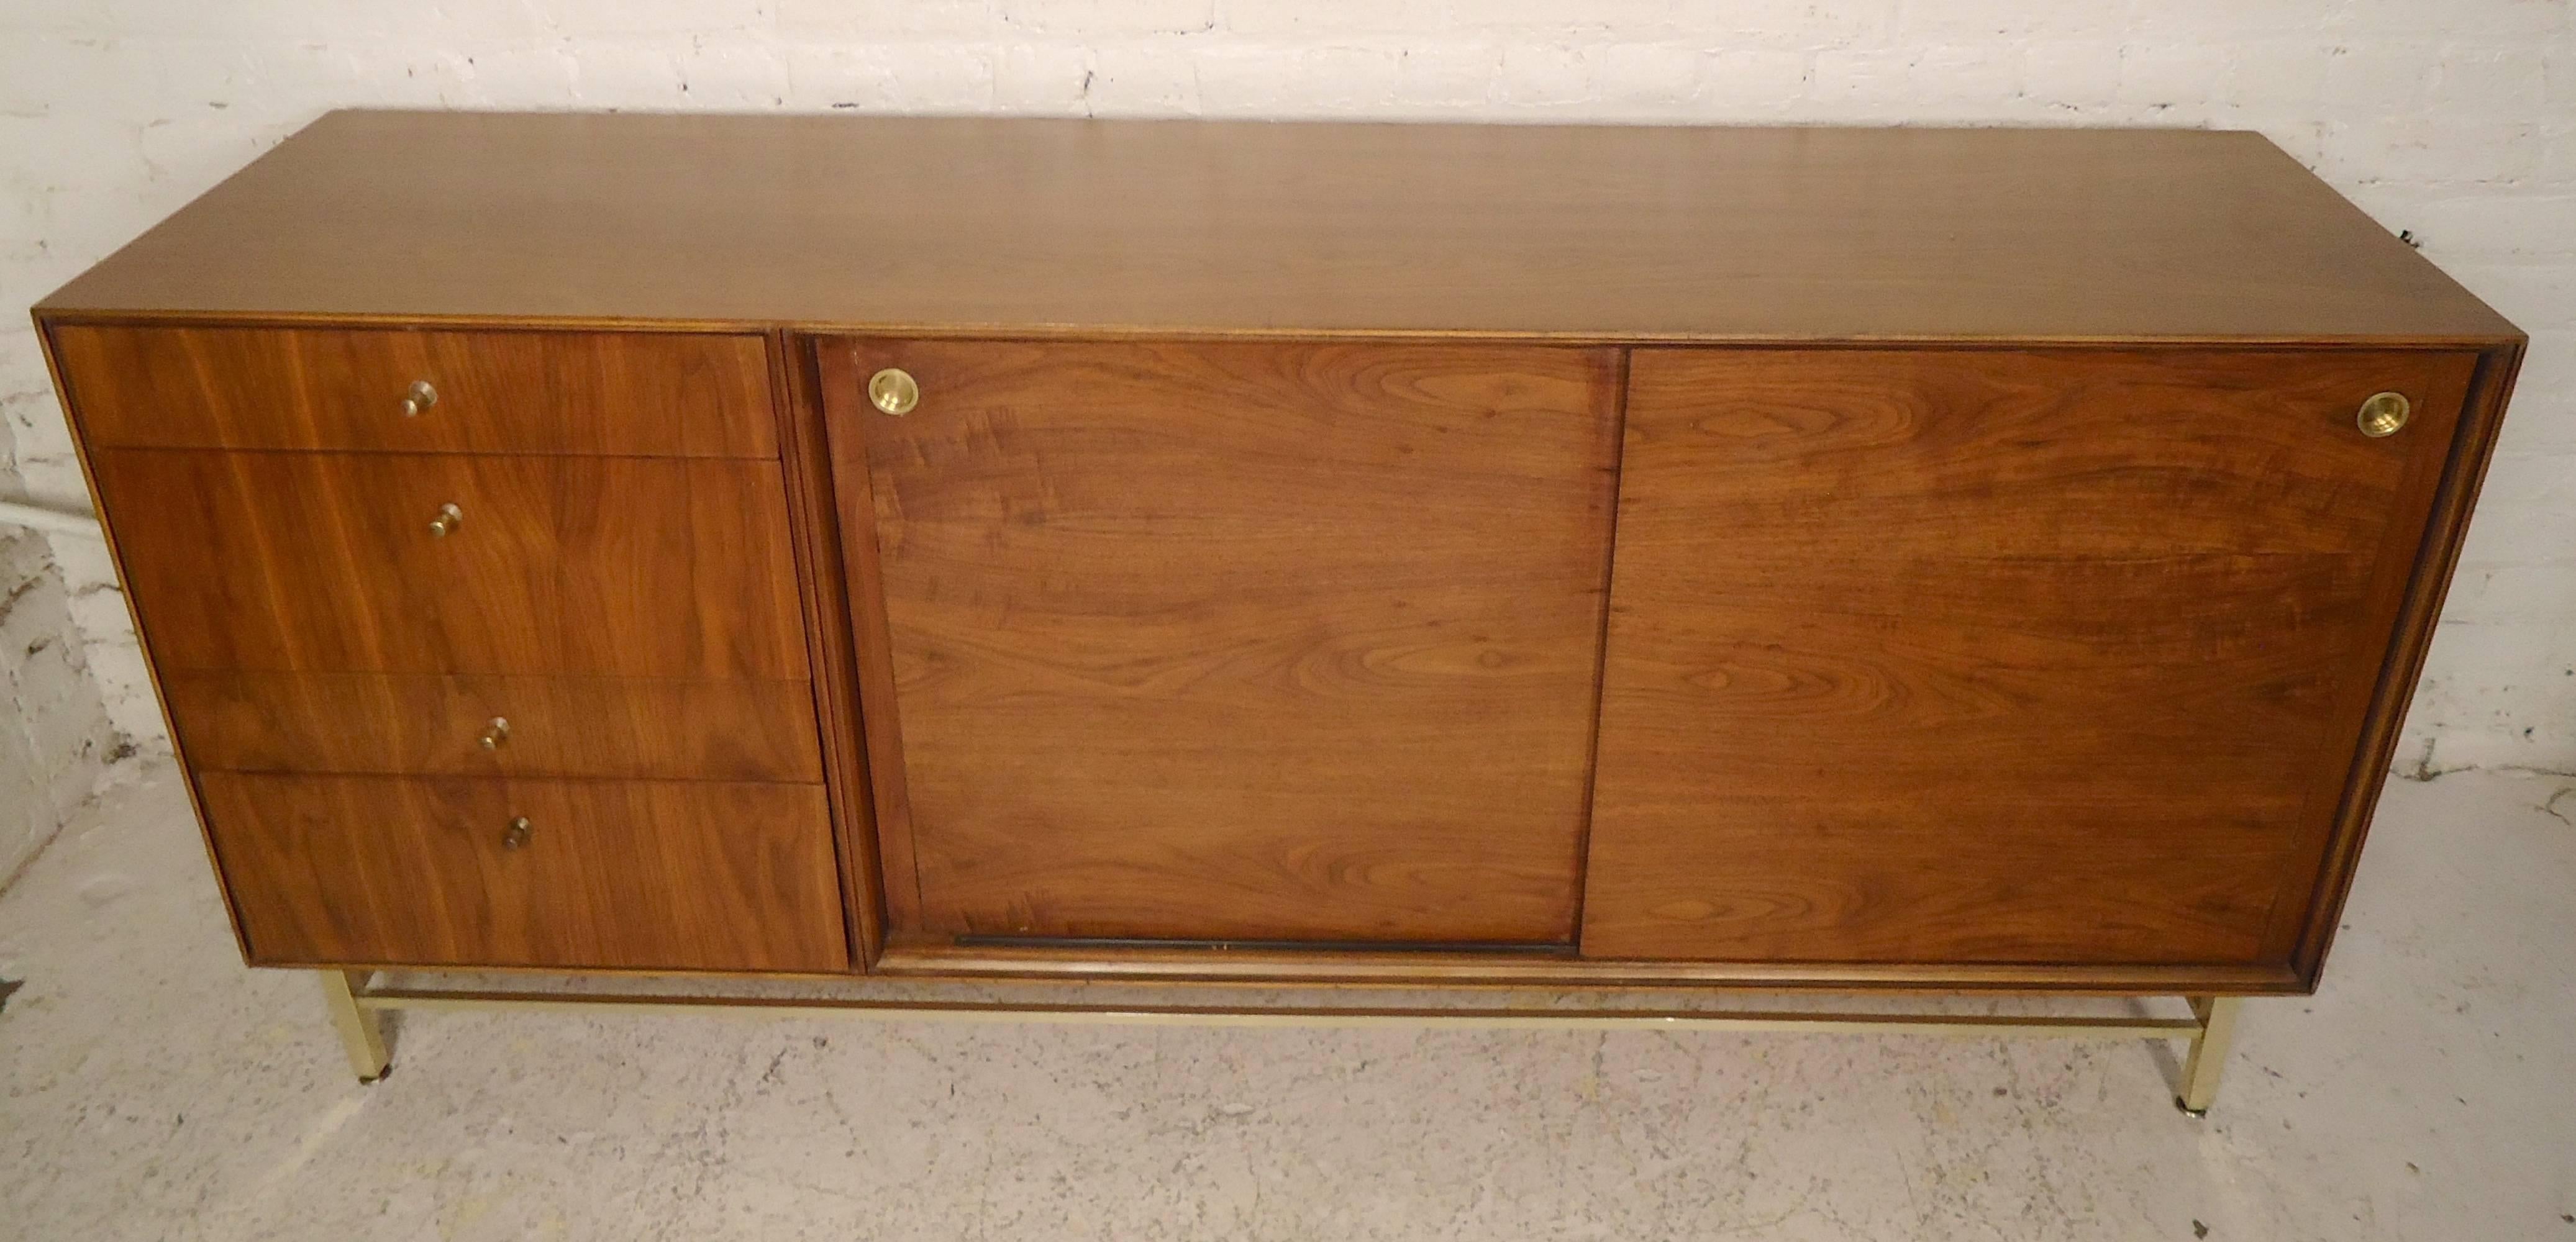 Beautiful vintage sliding door cabinet with brass trim and accents. Twelve total drawers make for a great bedroom dresser.

(Please confirm item location, NY or NJ, with dealer).
 